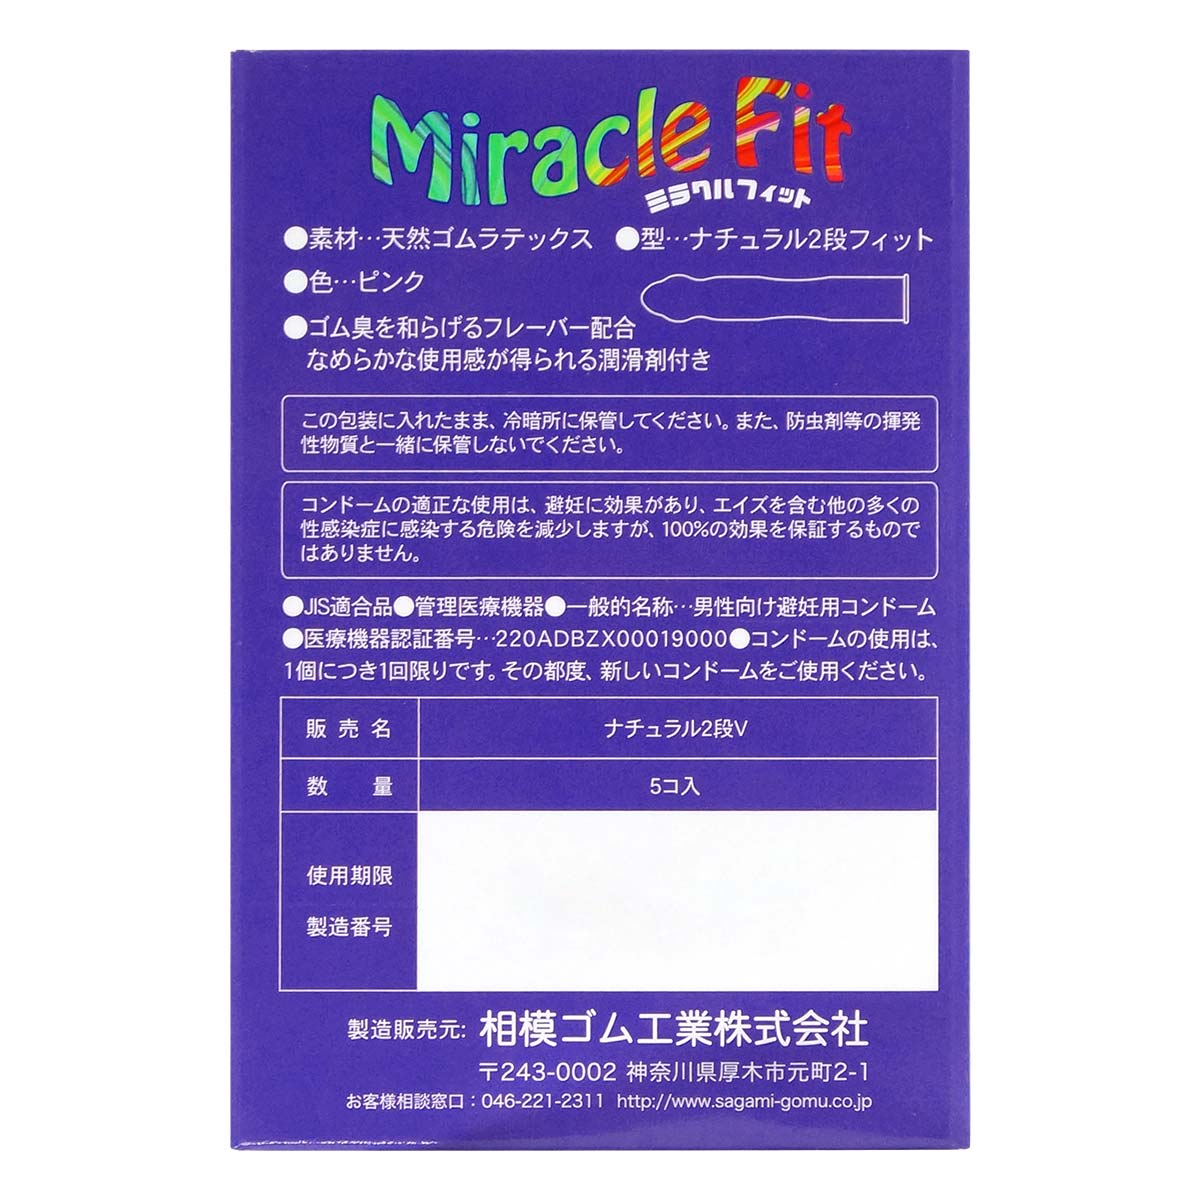 Sagami Miracle Fit 51mm 5's Pack Latex Condom-p_3